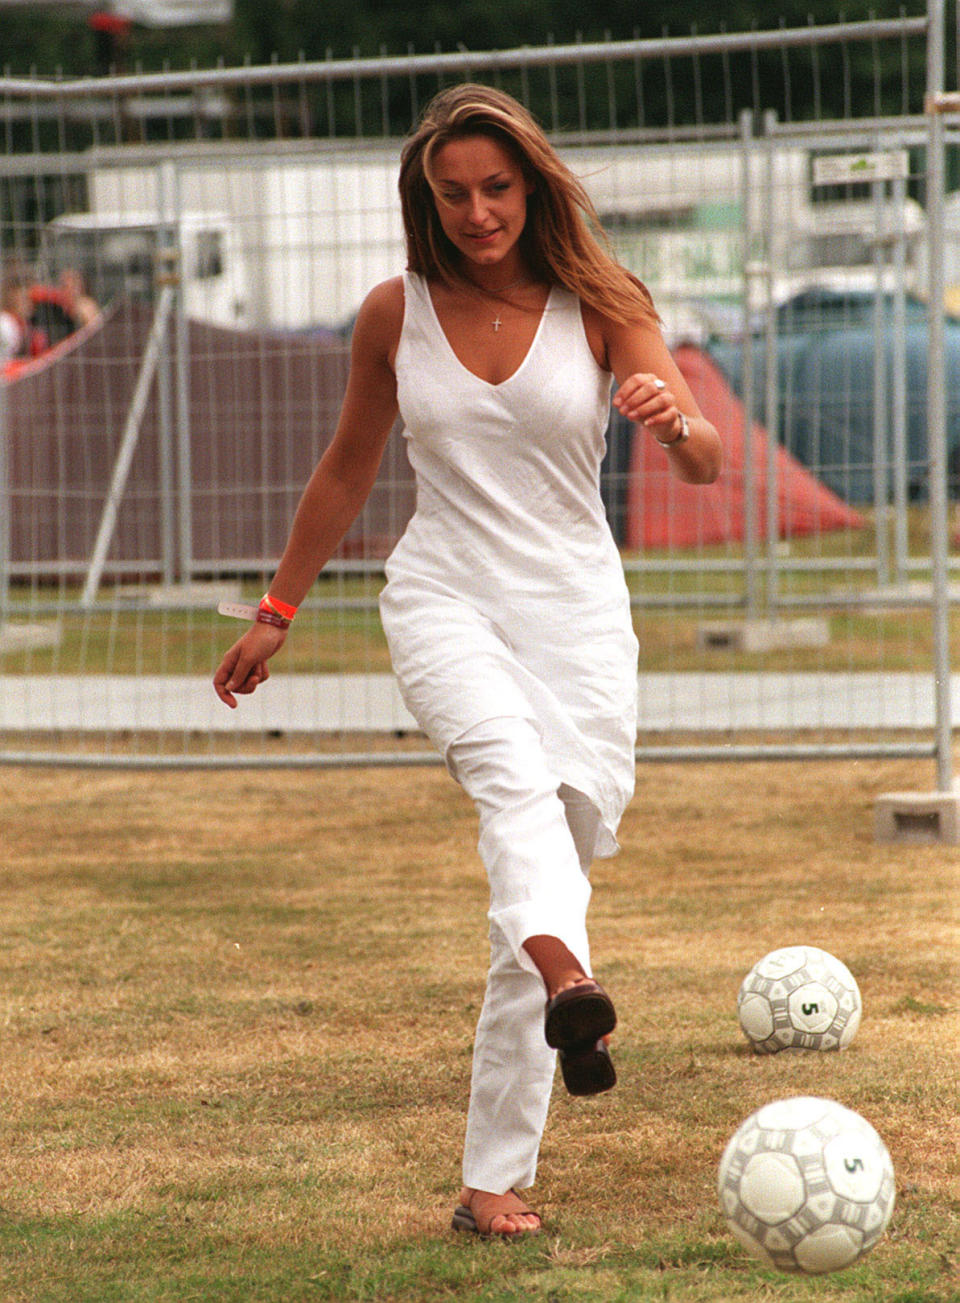 ACTRESS ANN MARIE DAVIES OF CHANNEL FOUR'S 'BROOKSIDE' AT THE V98 CELEBRITY FOOTBALL MATCH IN CHELMSFORD, ESSEX.